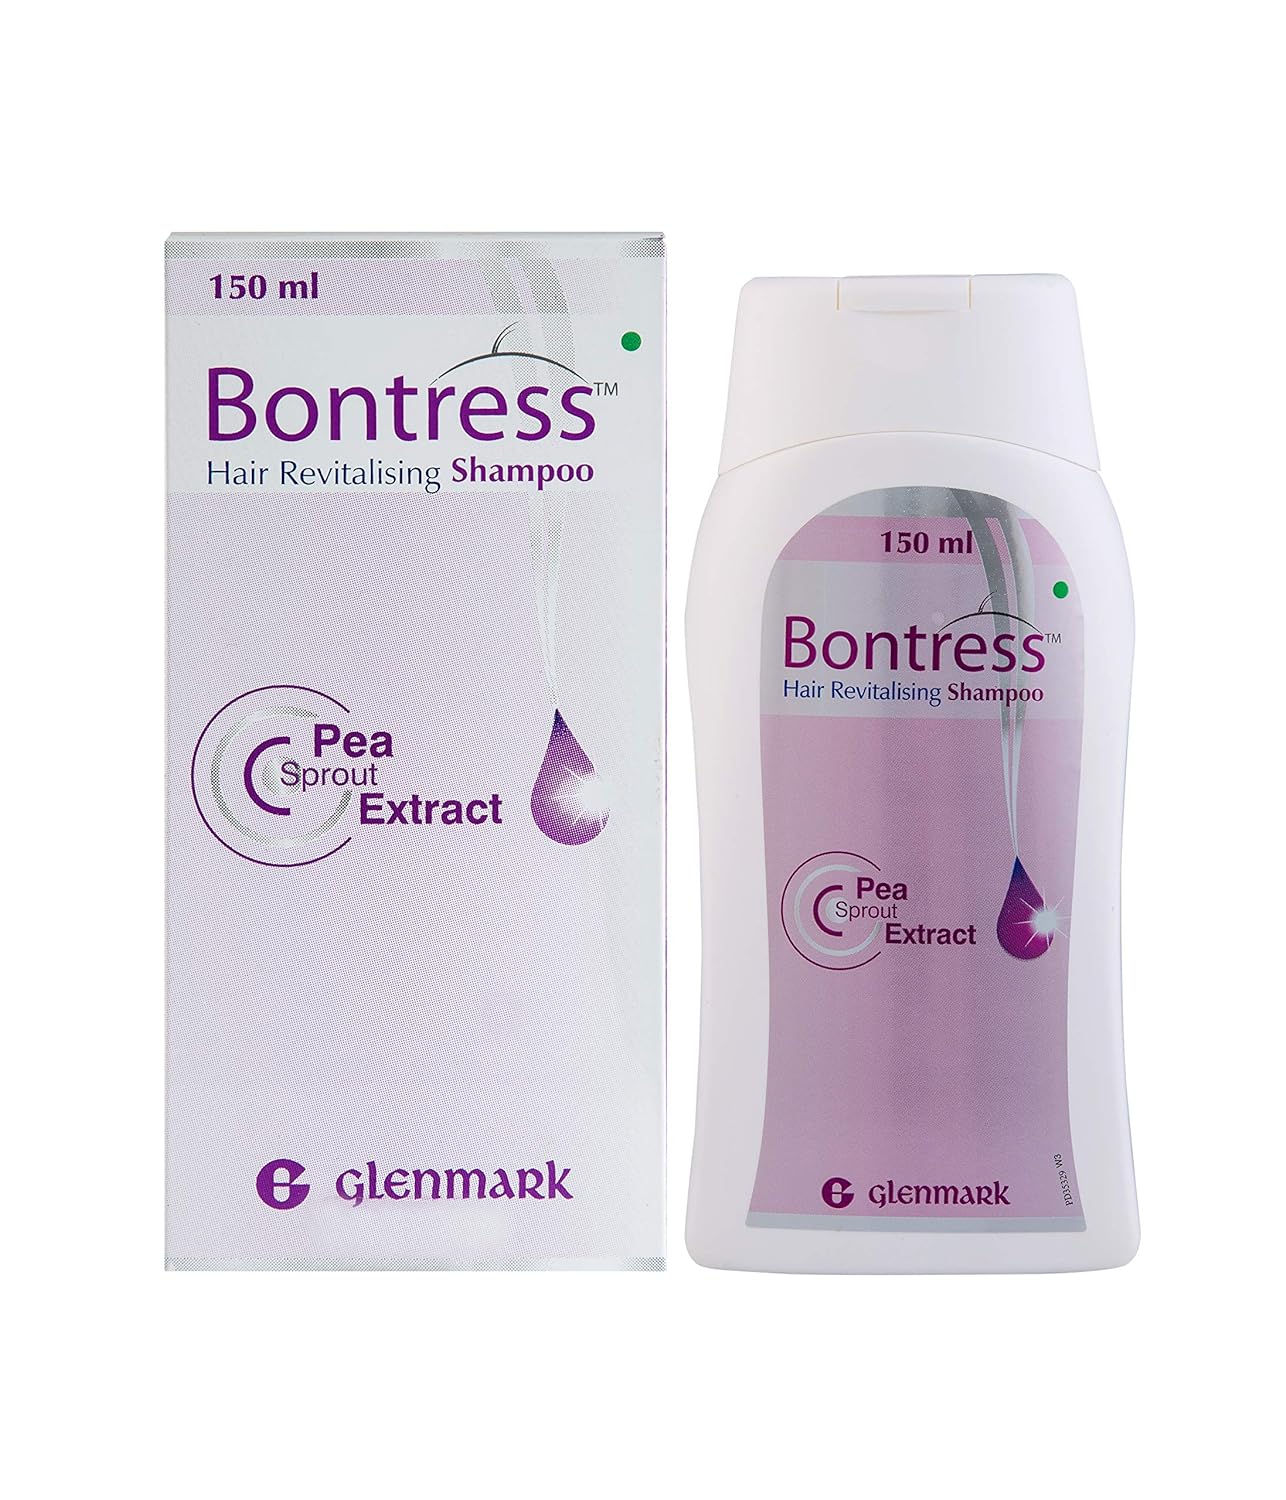 Buy online BONTRESS Hair Revitalising Shampoo at the best price in india 